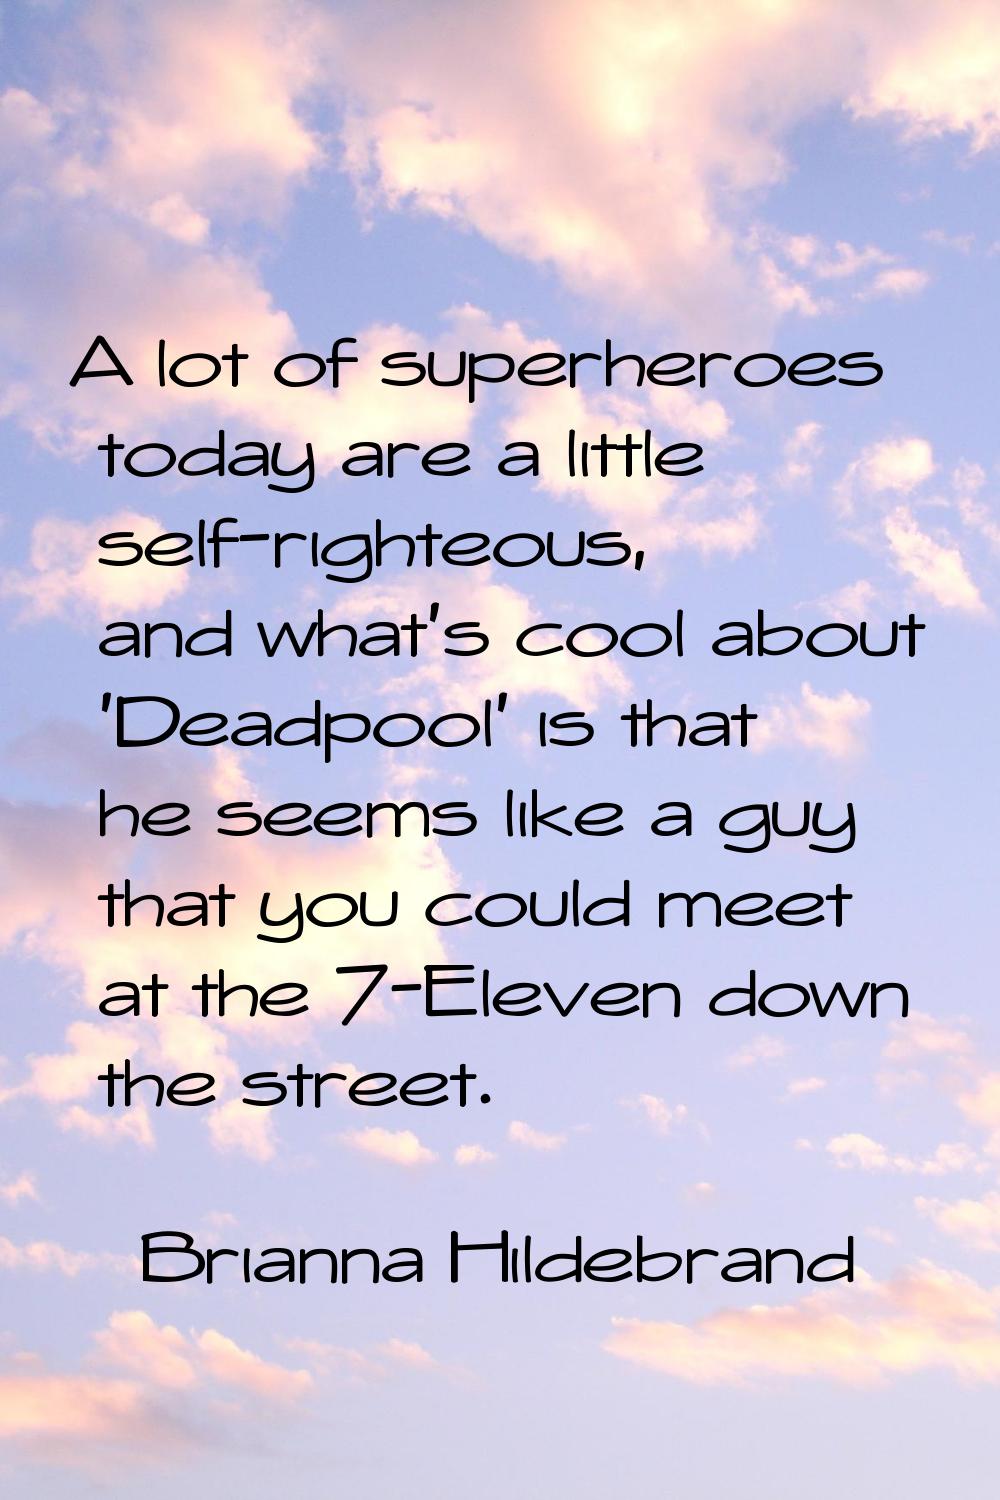 A lot of superheroes today are a little self-righteous, and what's cool about 'Deadpool' is that he